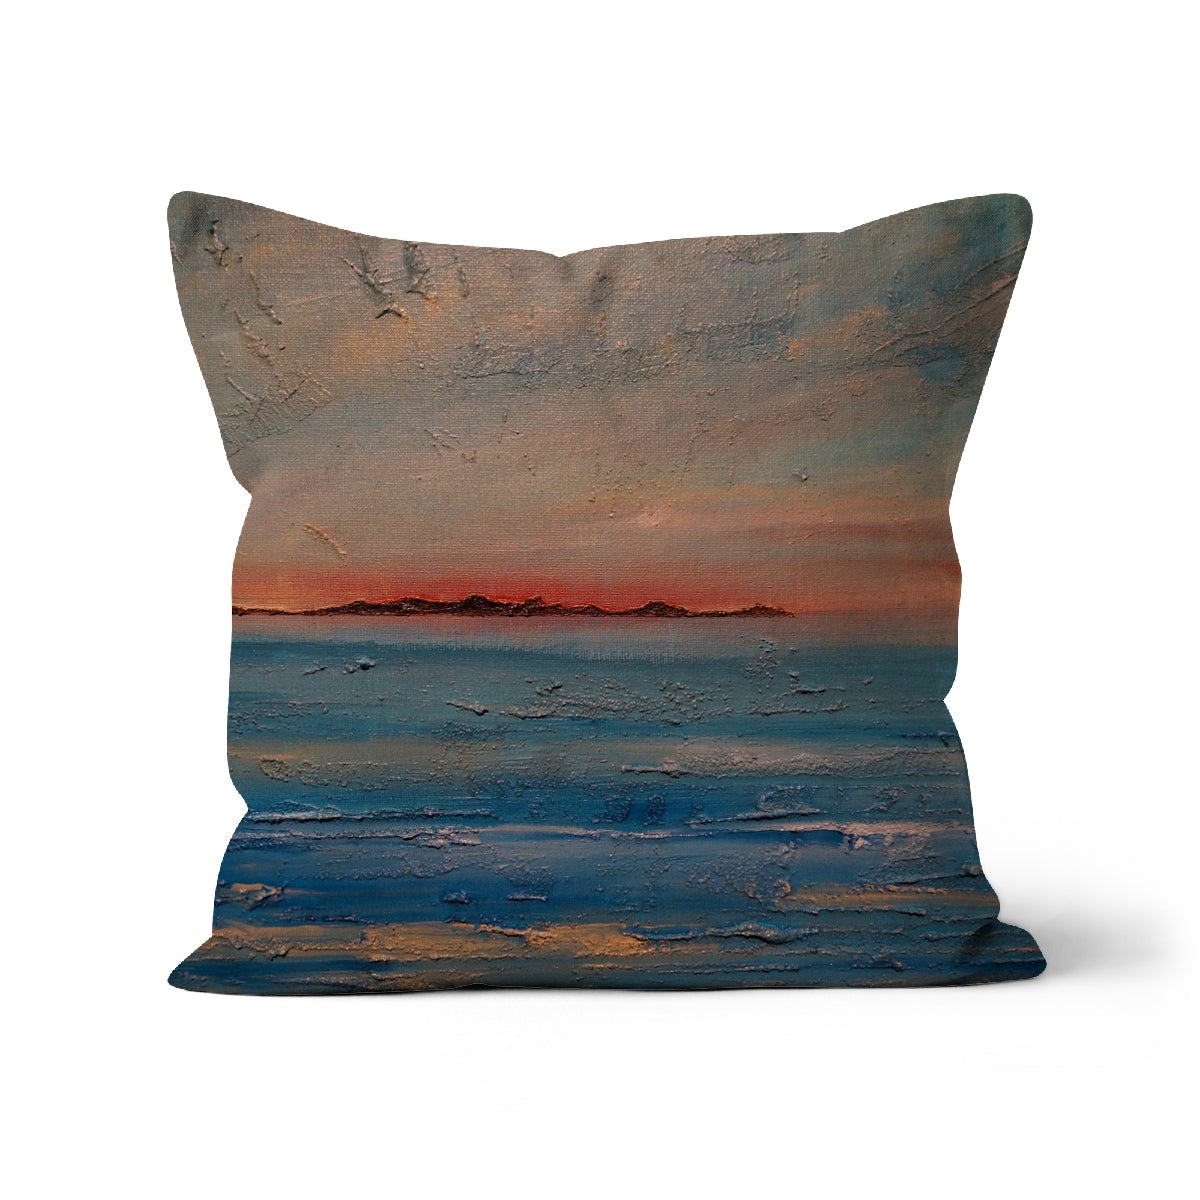 Gigha Sunset Art Gifts Cushion-Cushions-Hebridean Islands Art Gallery-Faux Suede-12"x12"-Paintings, Prints, Homeware, Art Gifts From Scotland By Scottish Artist Kevin Hunter